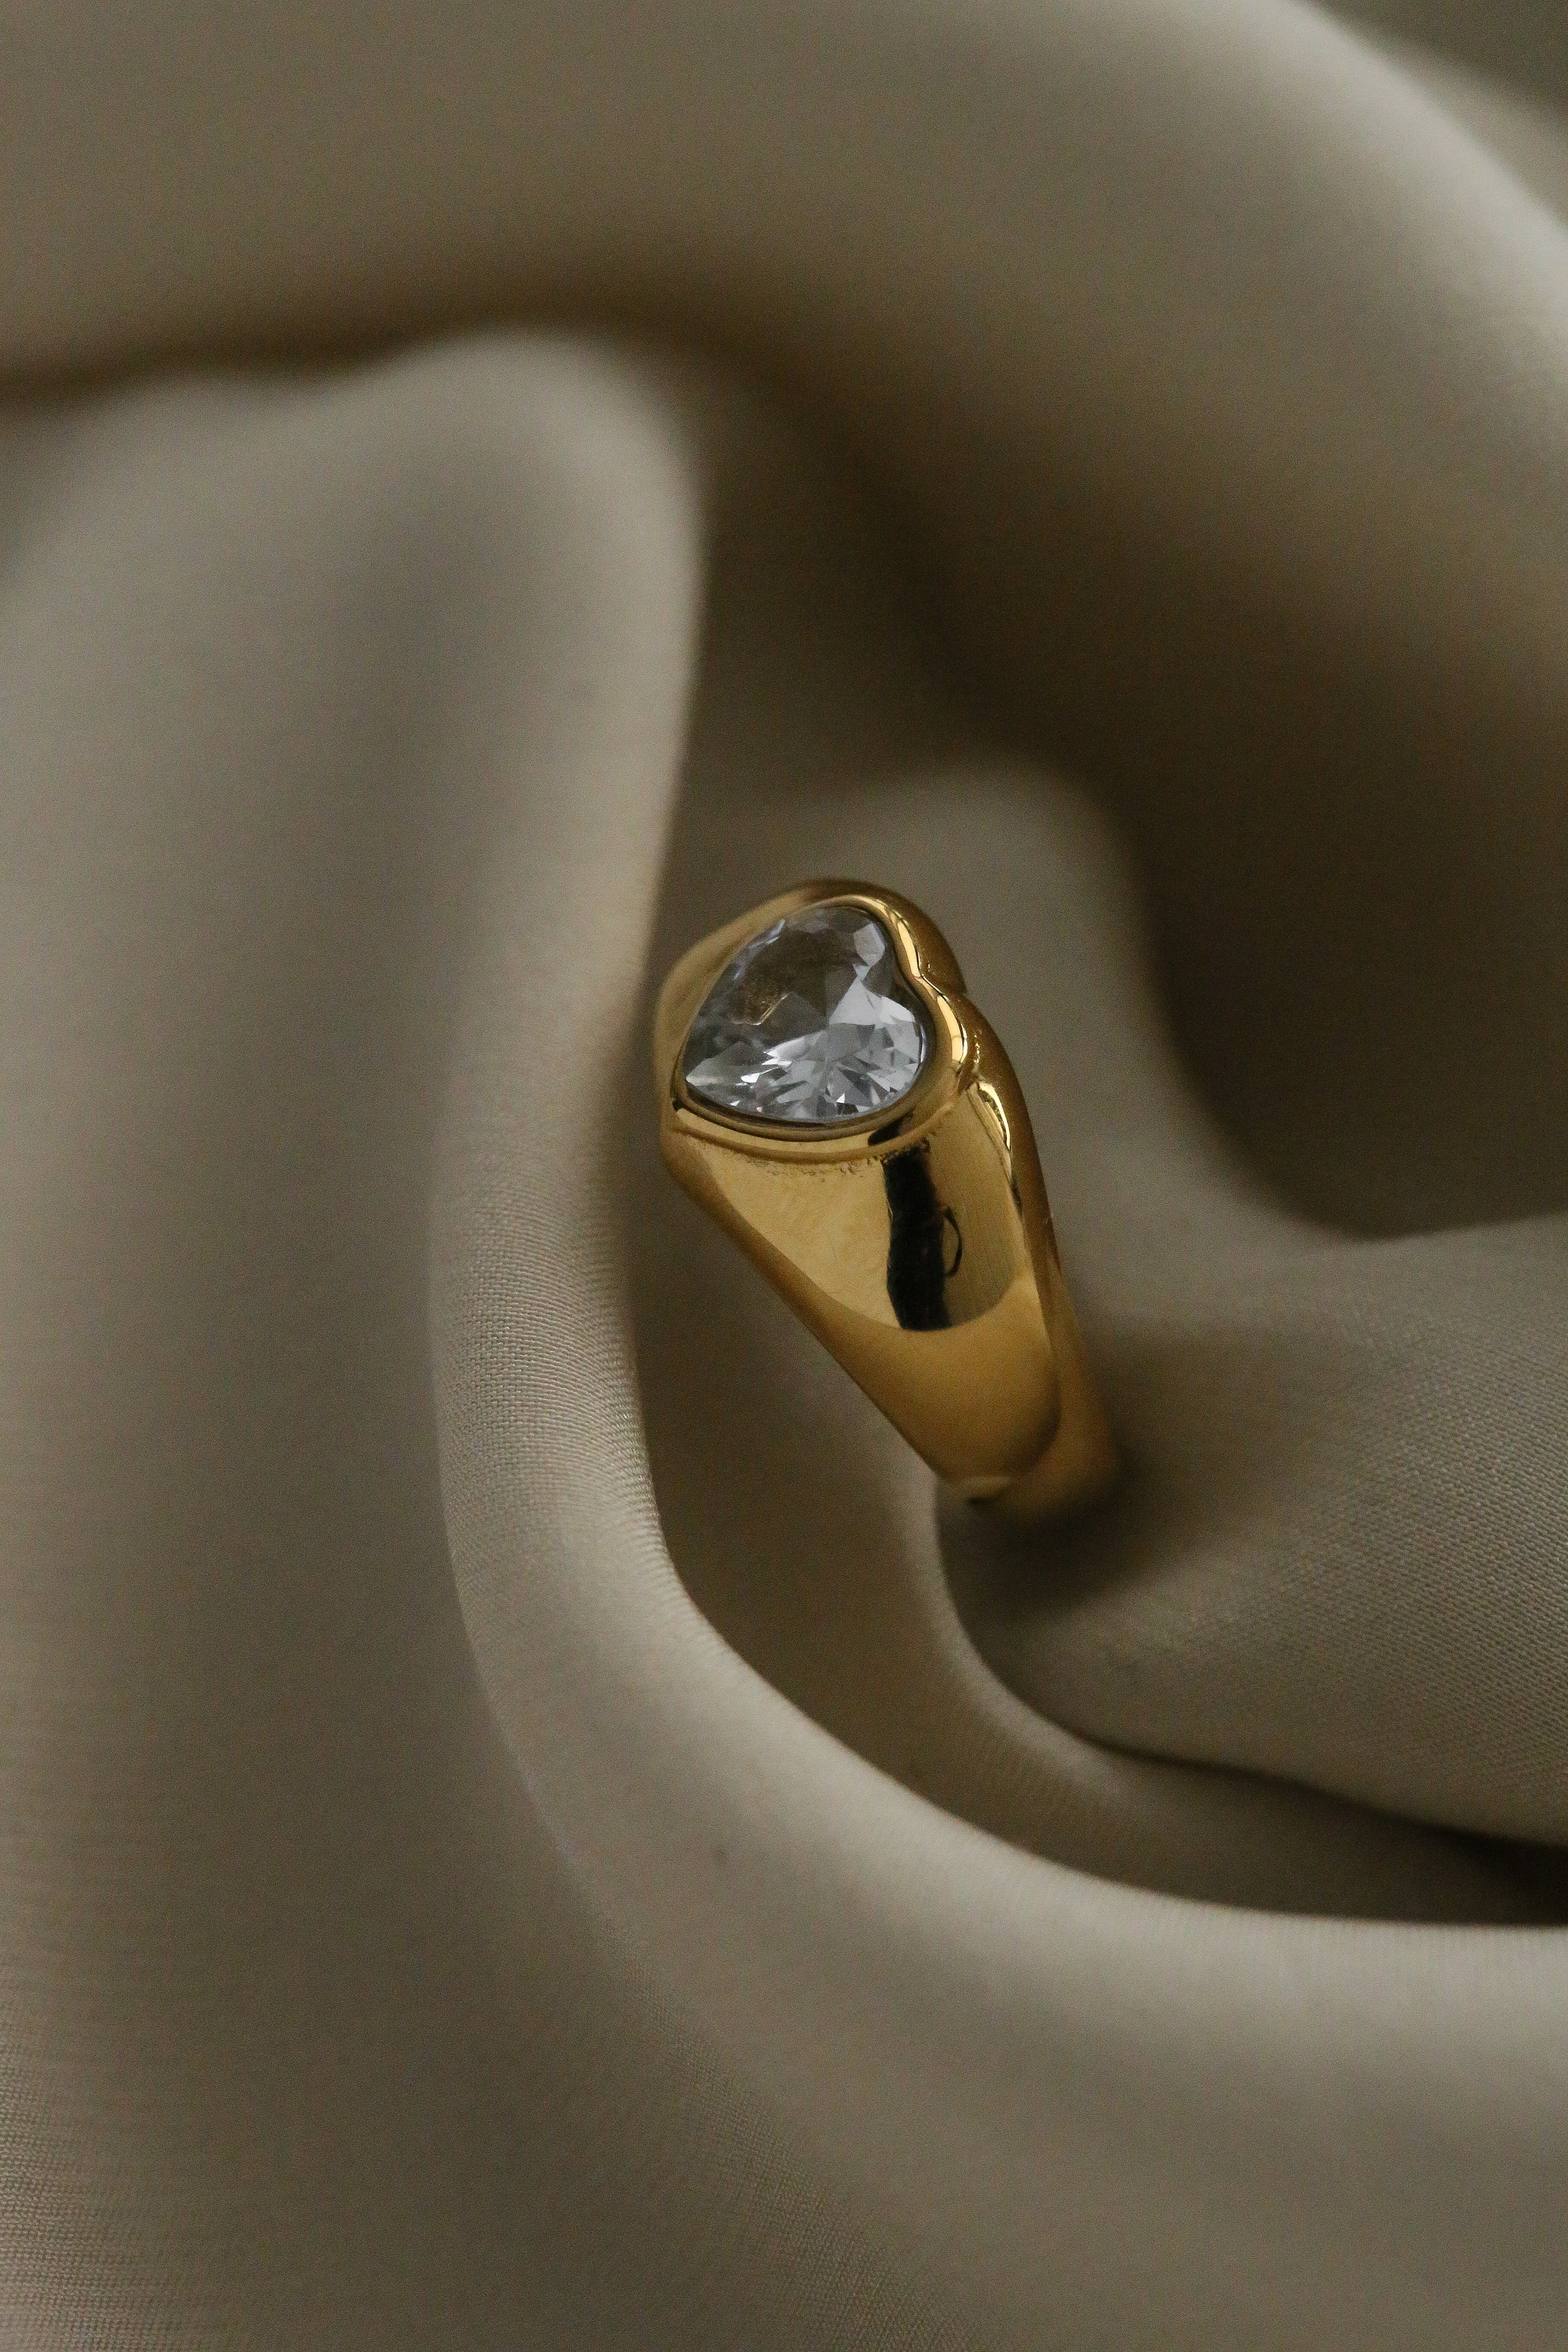 Rachelle Ring - Boutique Minimaliste has waterproof, durable, elegant and vintage inspired jewelry